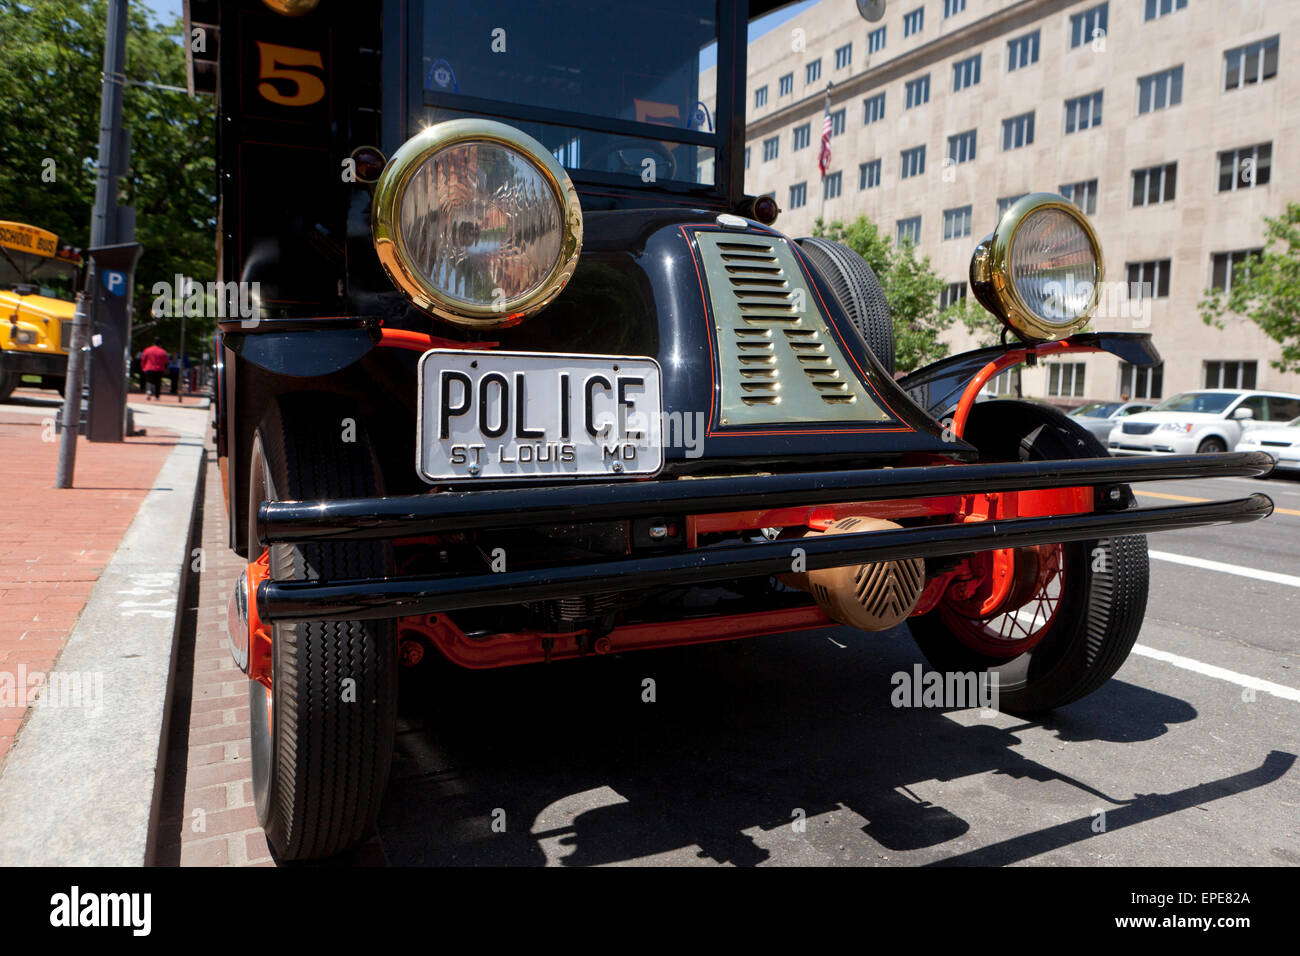 St. Louis Police Officers Association vintage police paddy wagon - USA Stock Photo